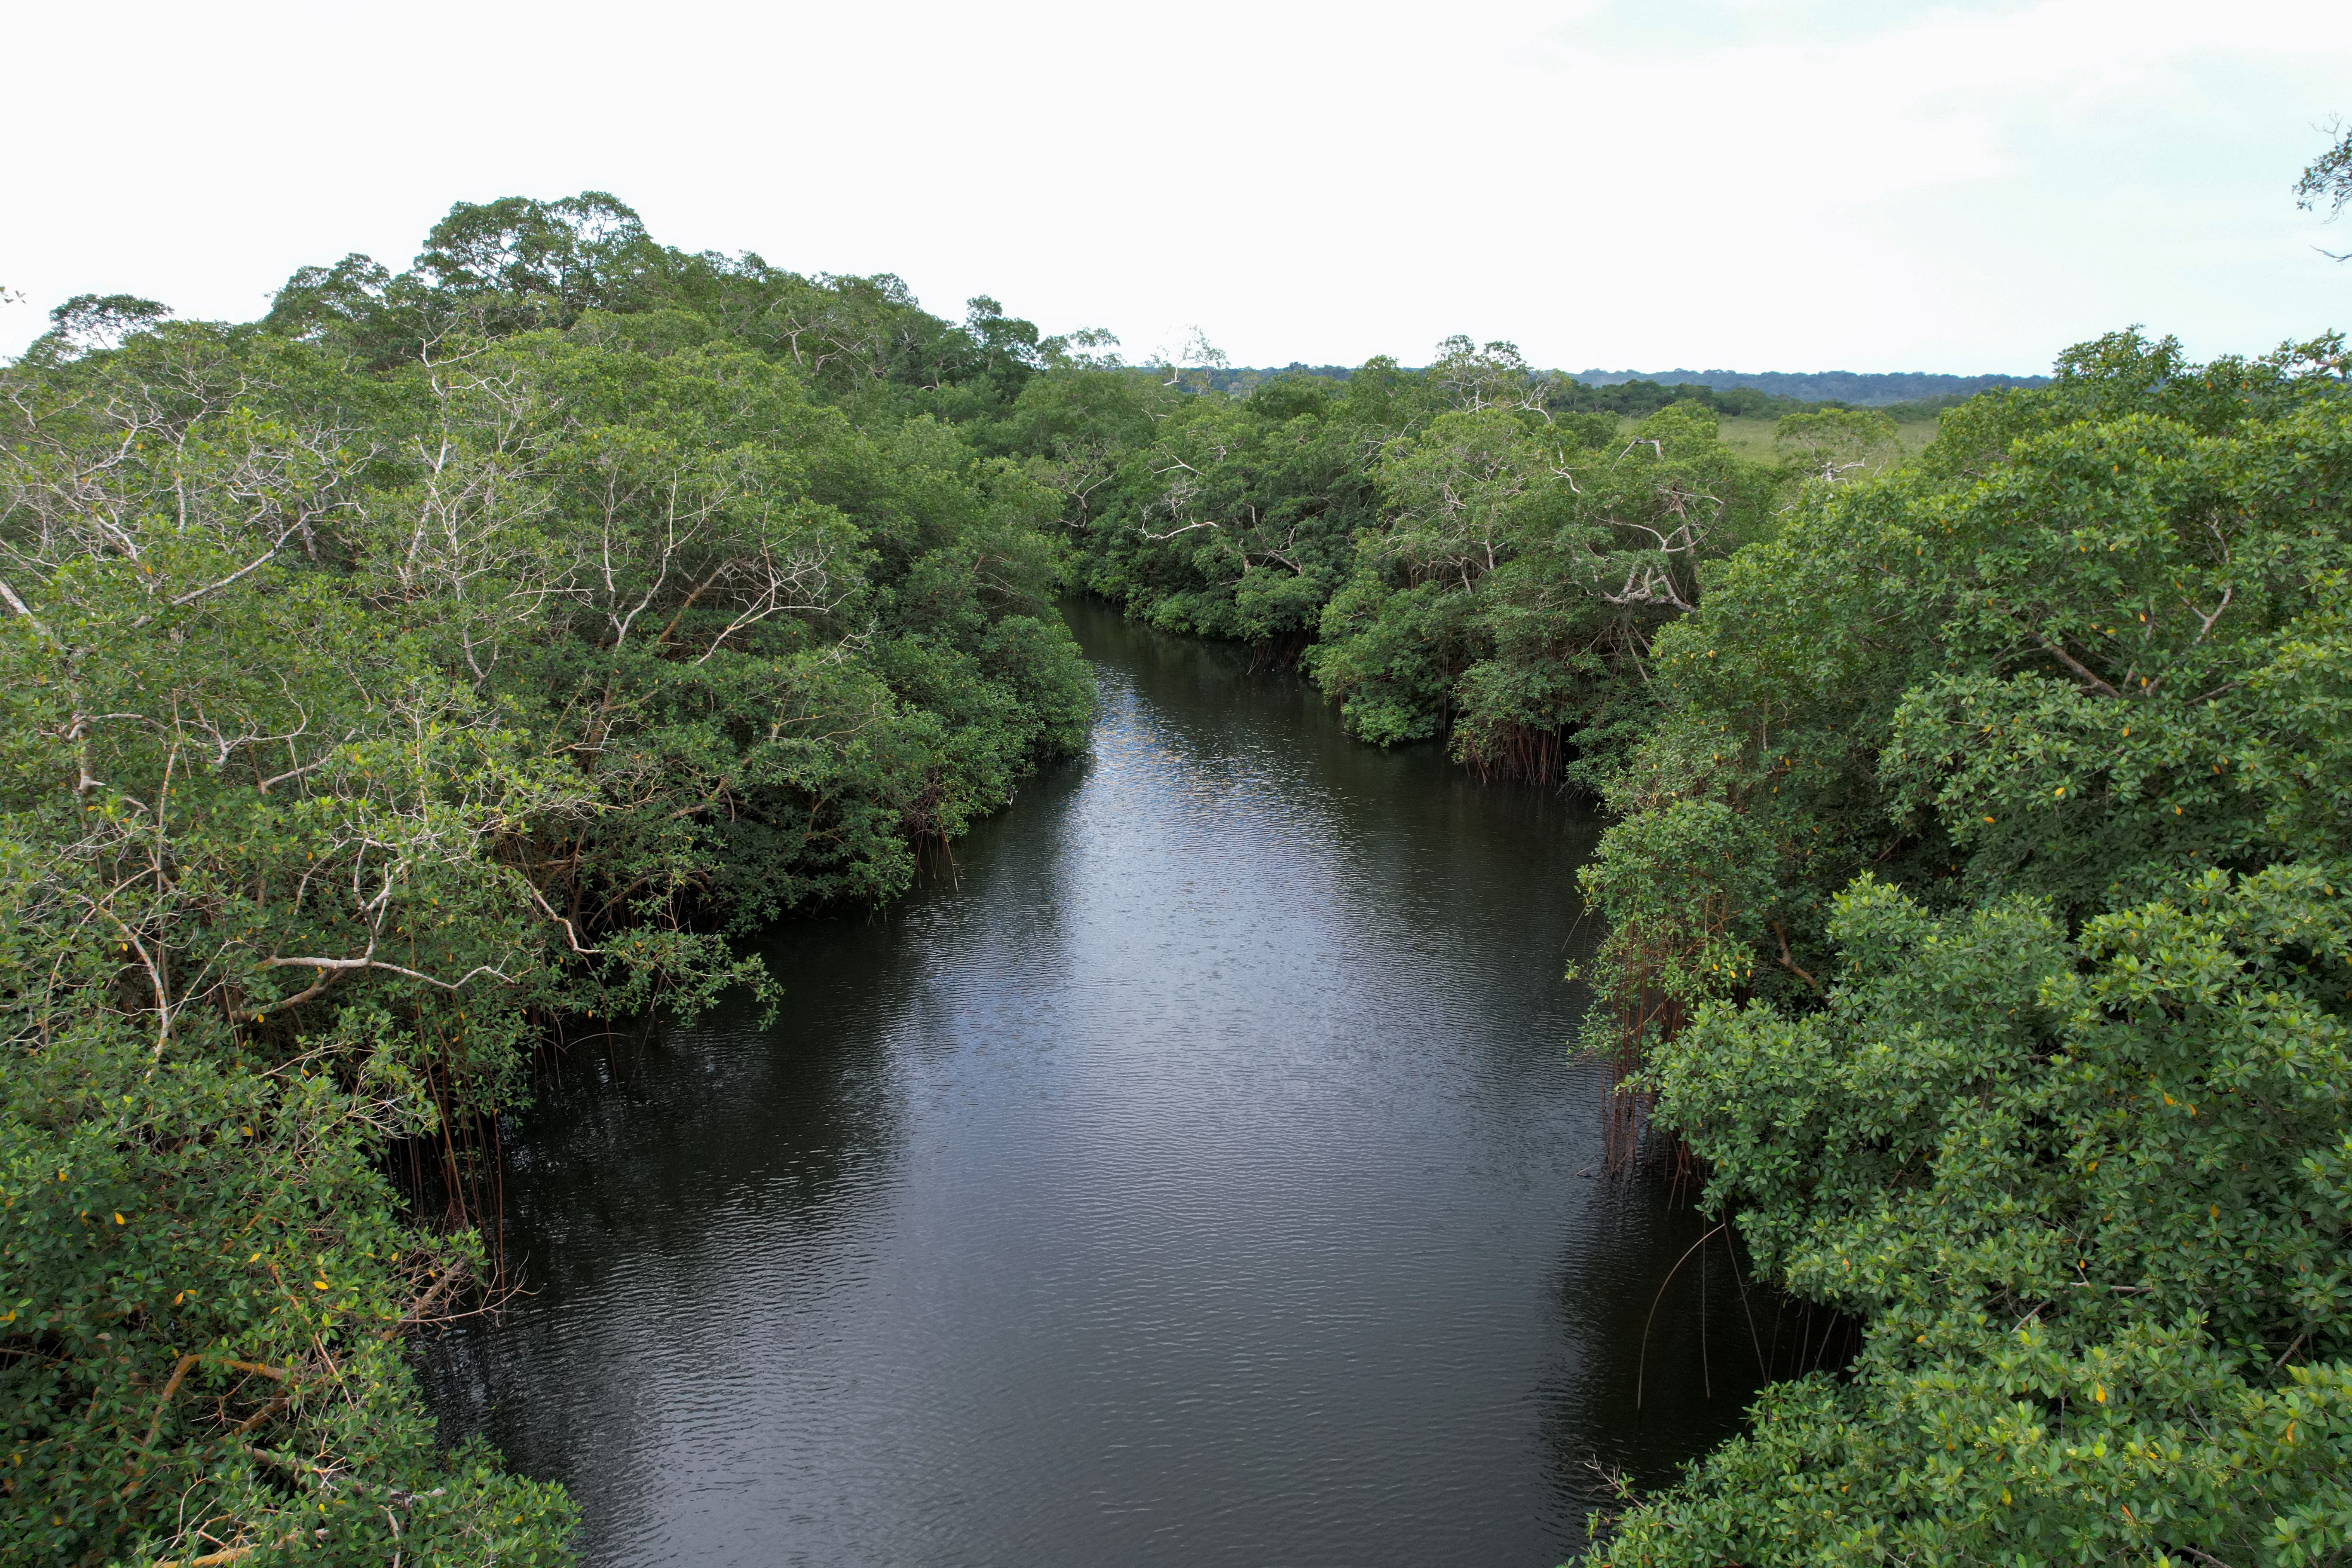 Gabon plumbs carbon of its mighty mangrove trees | Reuters